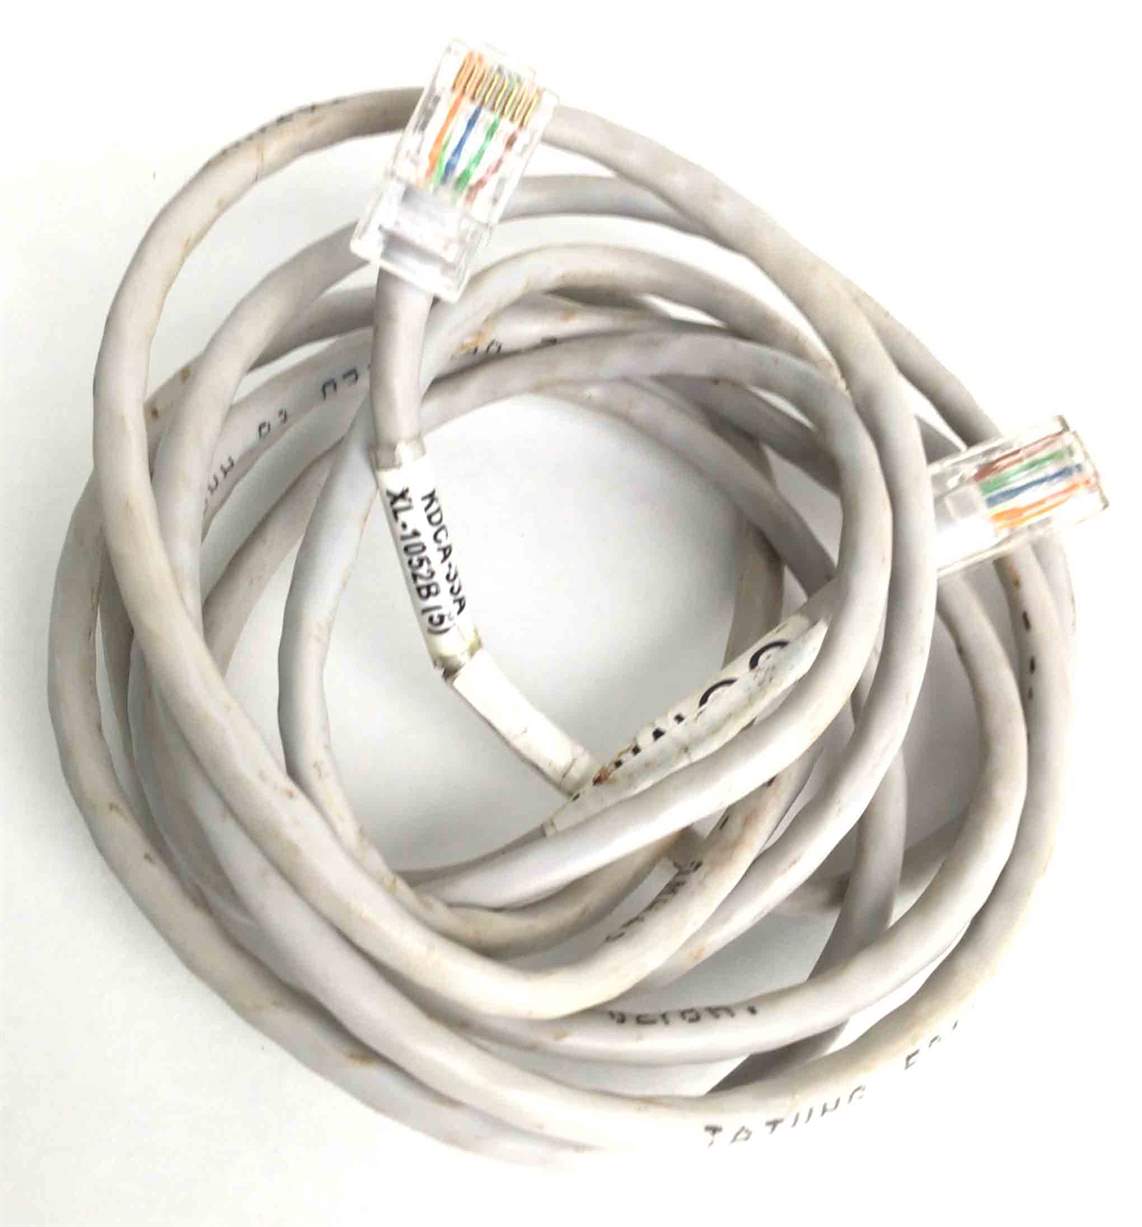 Internet Cable (Used)